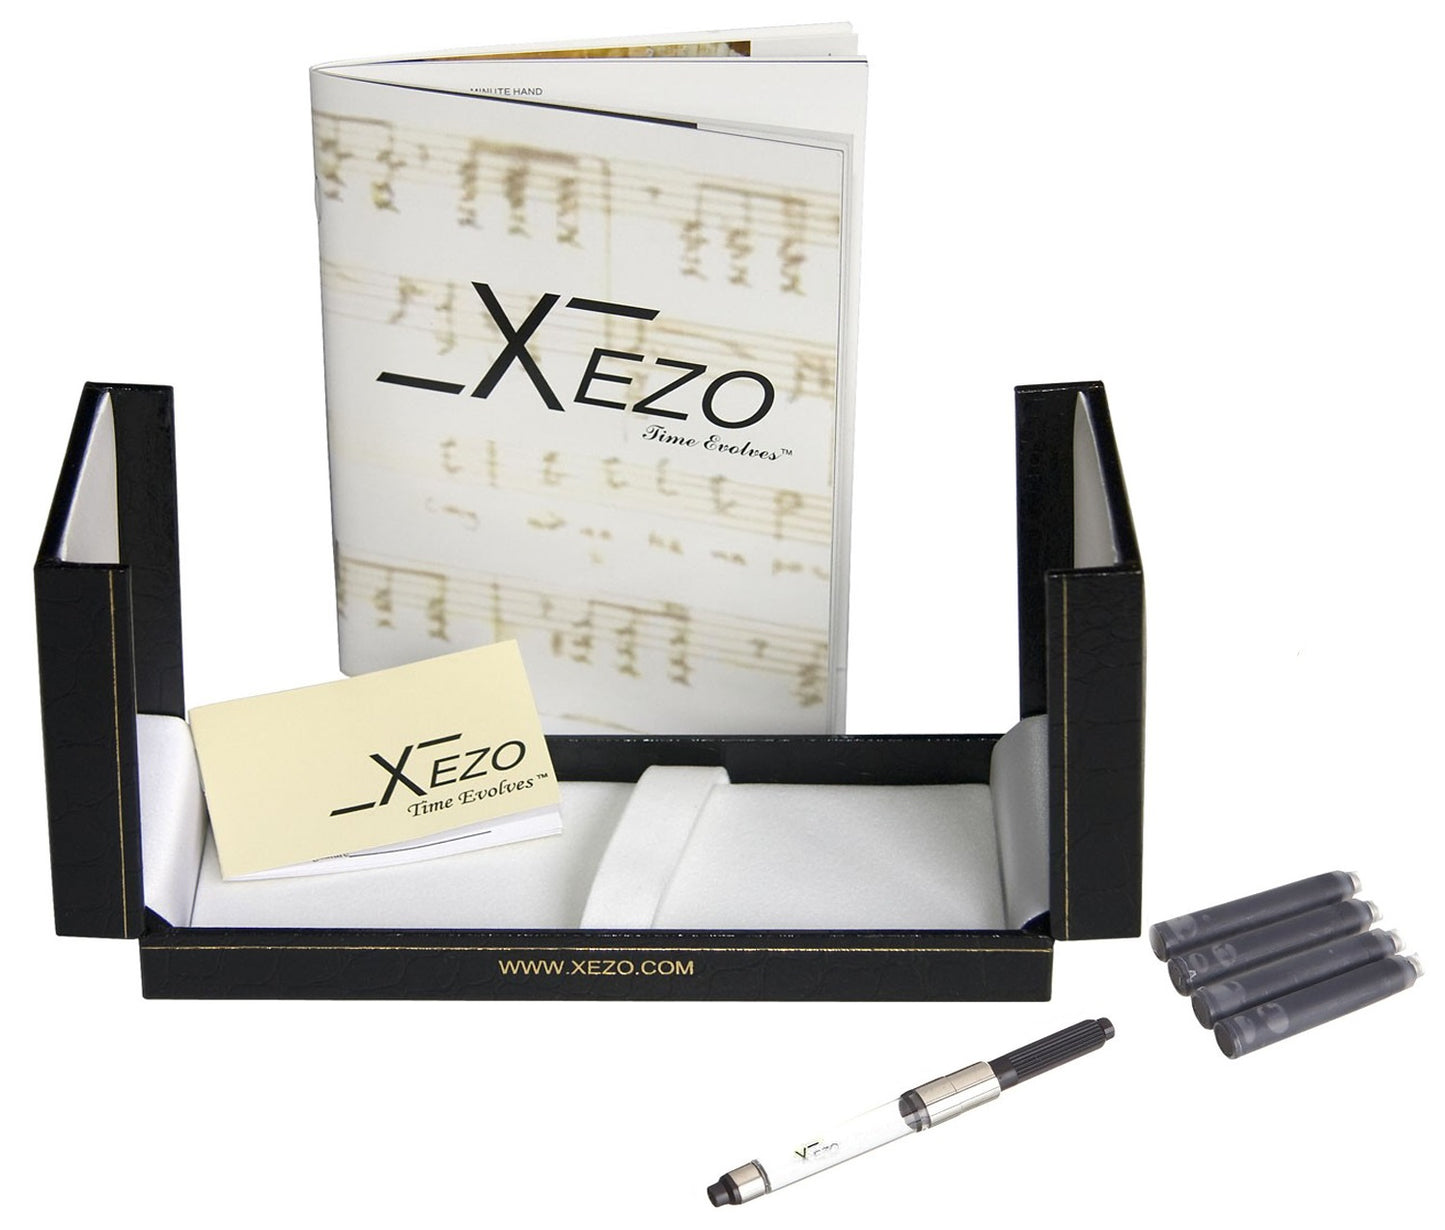 Xezo - Black gift box, certificate, manual, chrome-plated ink converter, and four ink cartridges of the Maestro Black Mother of Pearl FBP-2 fountain pen